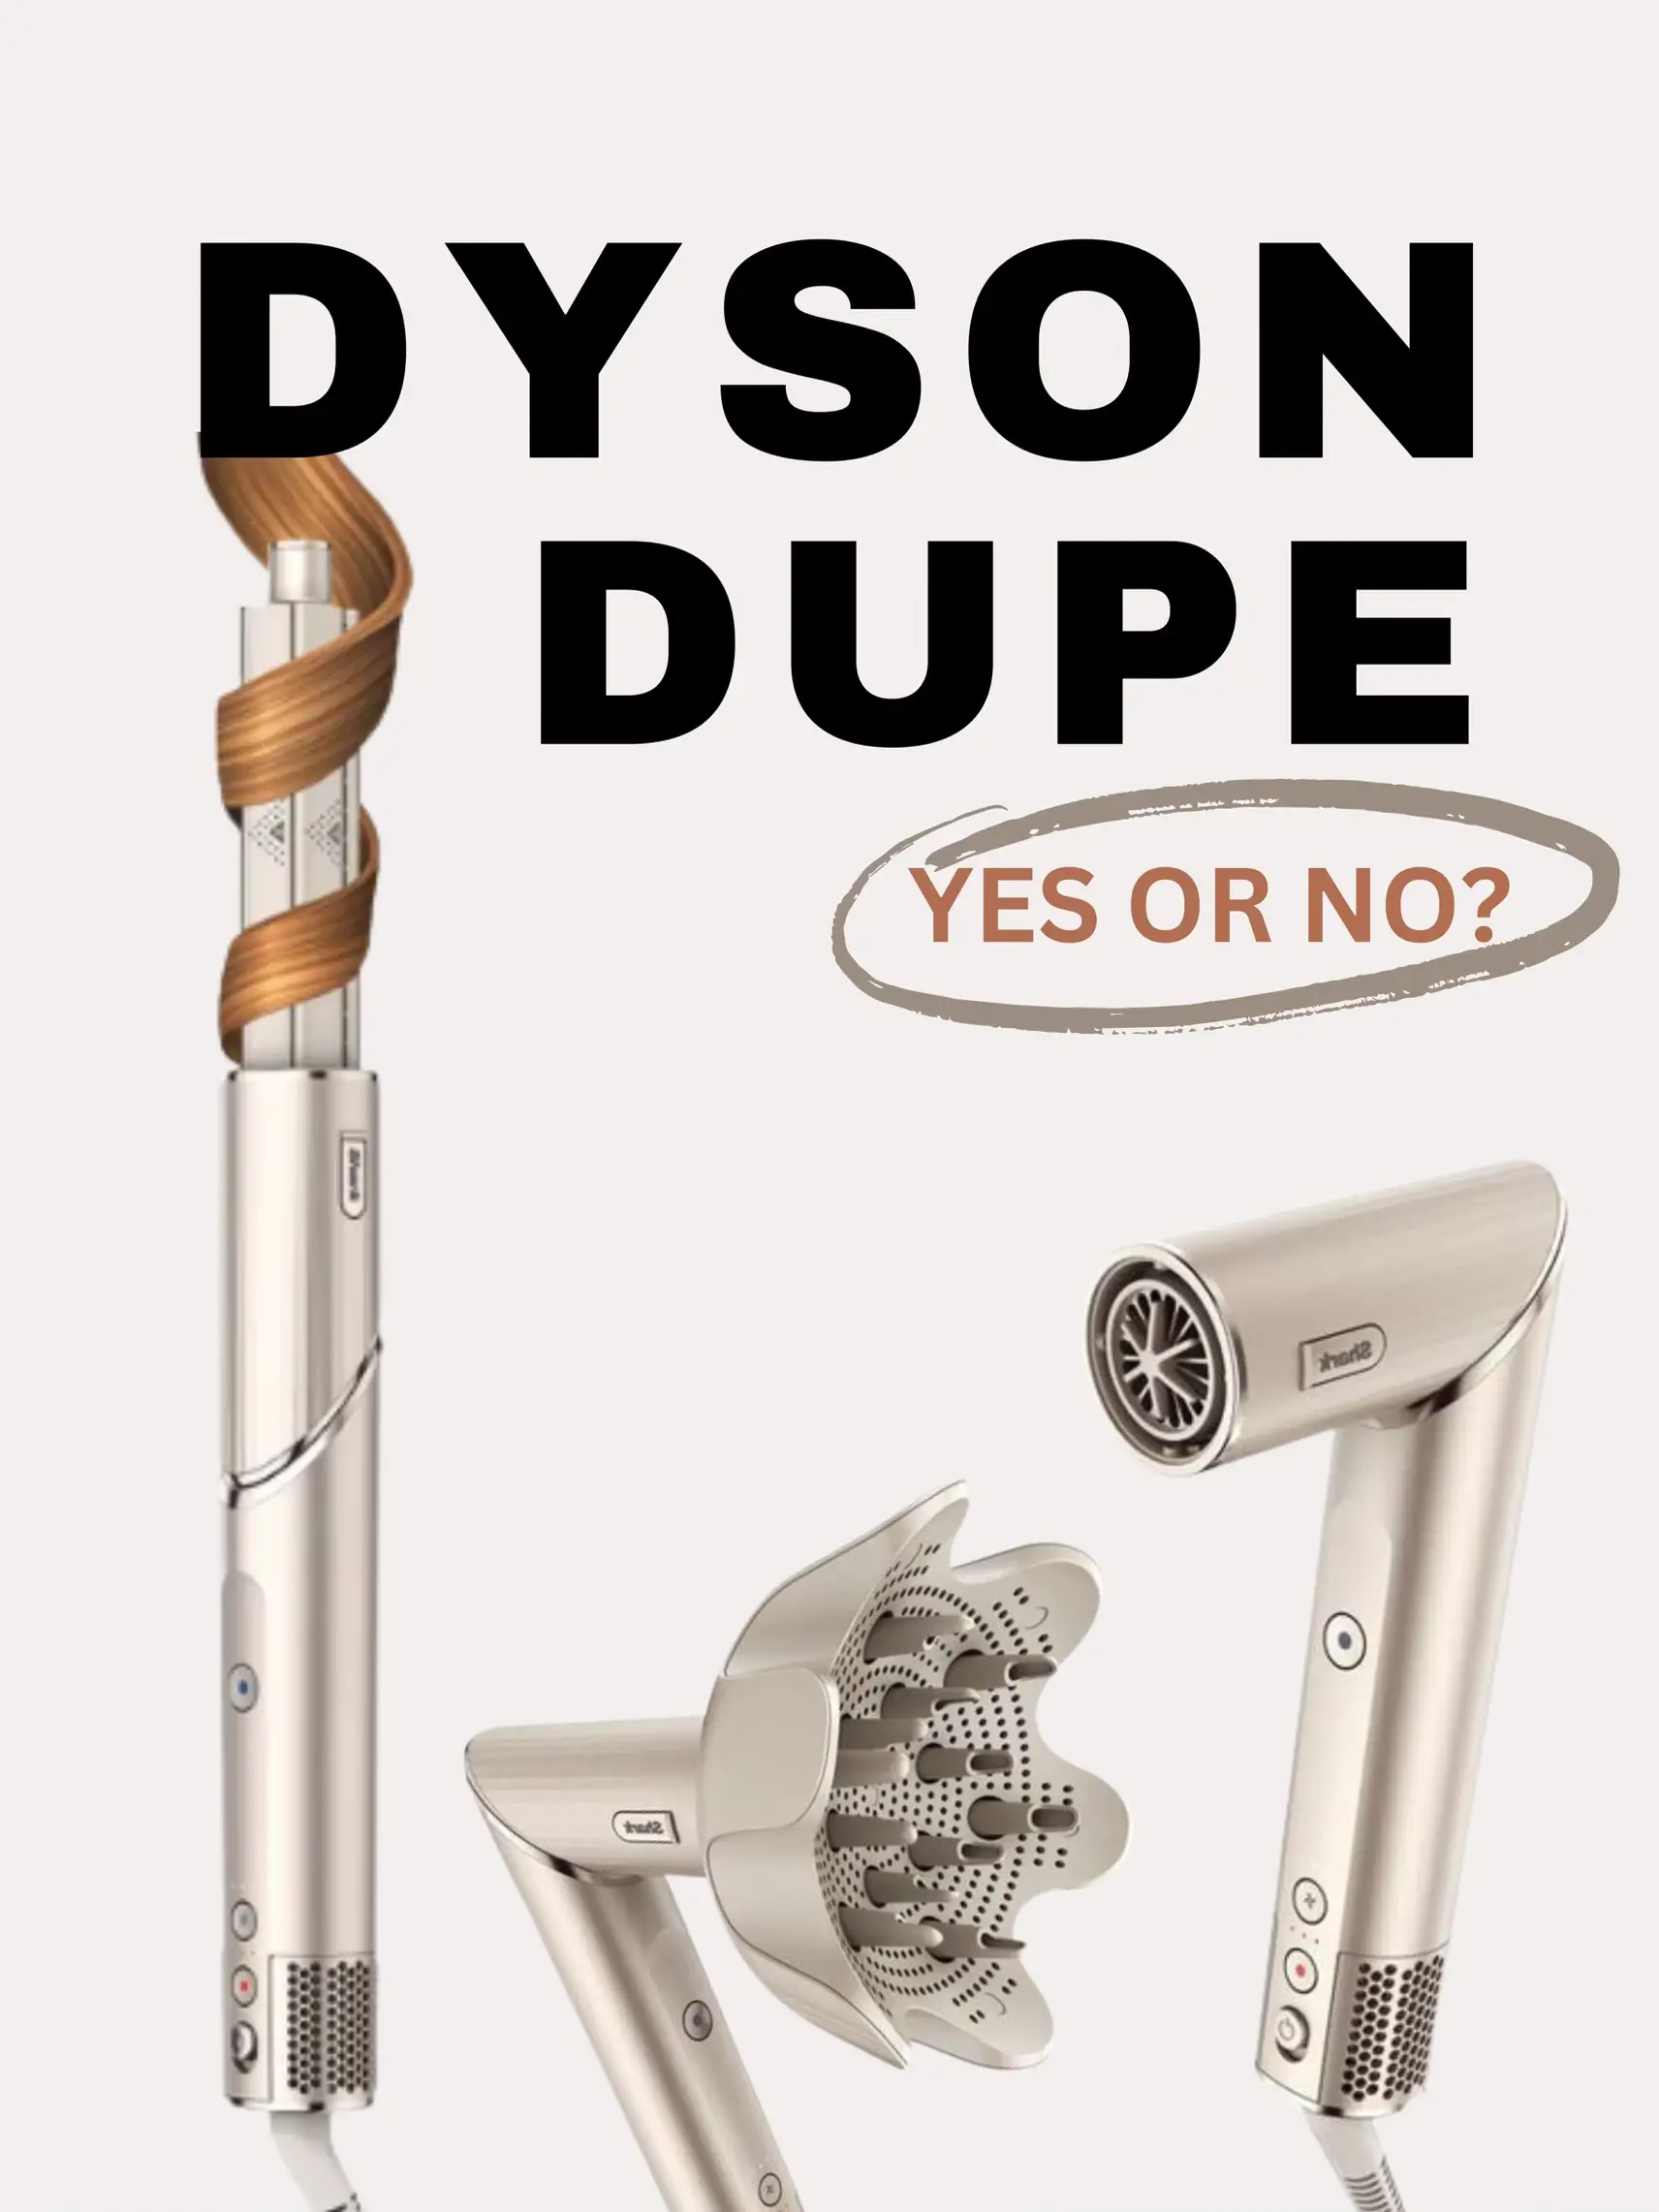 DYSON AIRWRAP DUPE‼️ (Yes or No?)'s images(0)